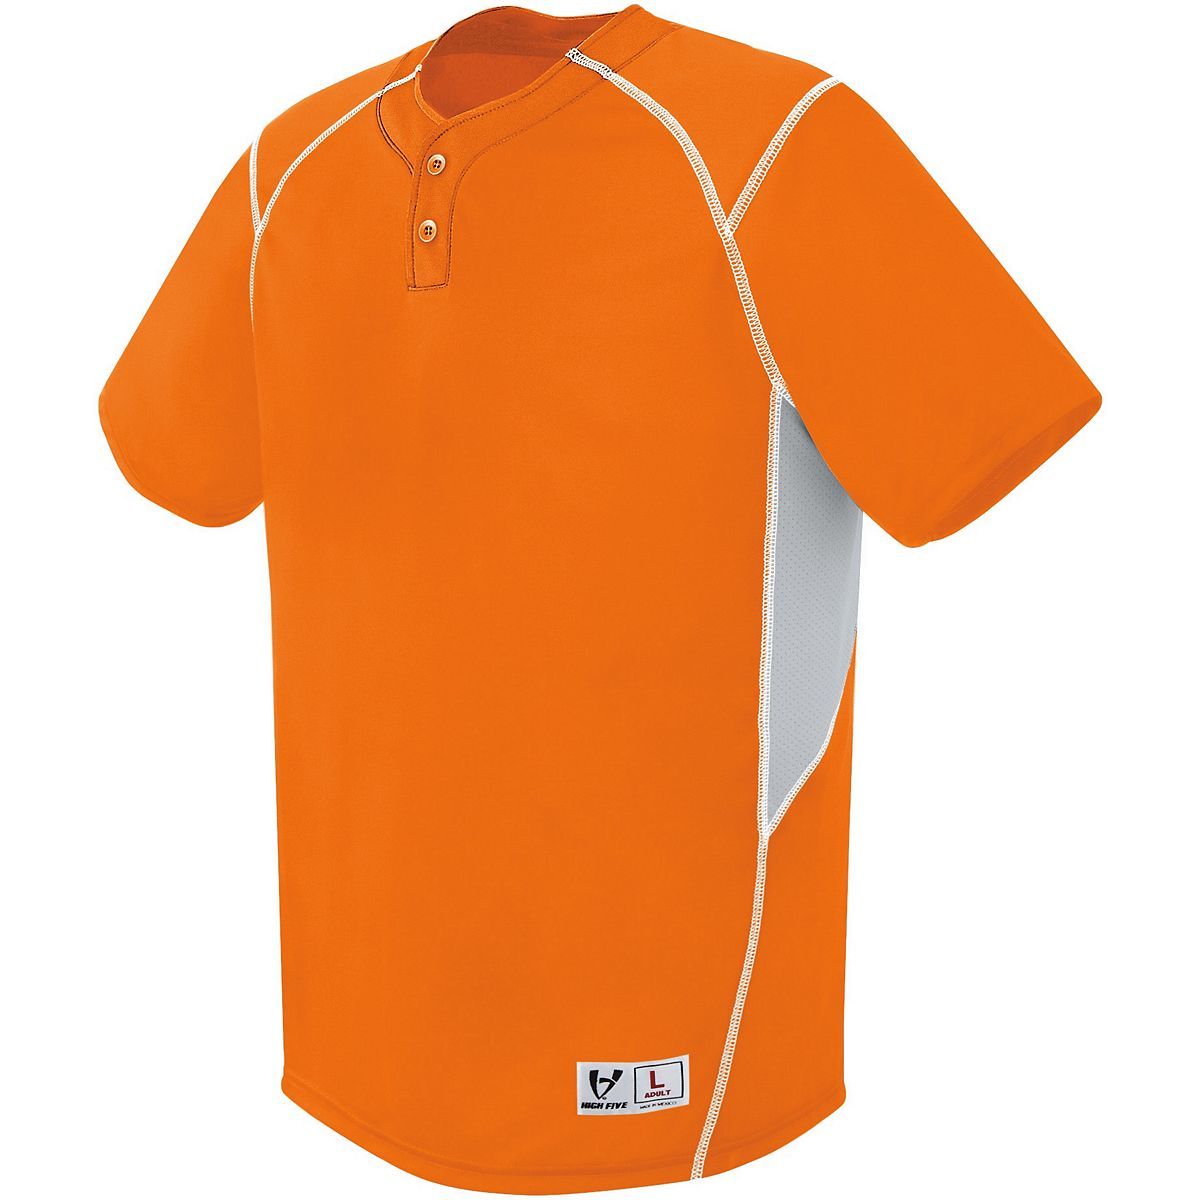 Augusta Sportswear Youth Bandit Two-Button Jersey in Orange/Silver Grey/White  -Part of the Youth, Youth-Jersey, Augusta-Products, Baseball, Shirts, All-Sports, All-Sports-1 product lines at KanaleyCreations.com